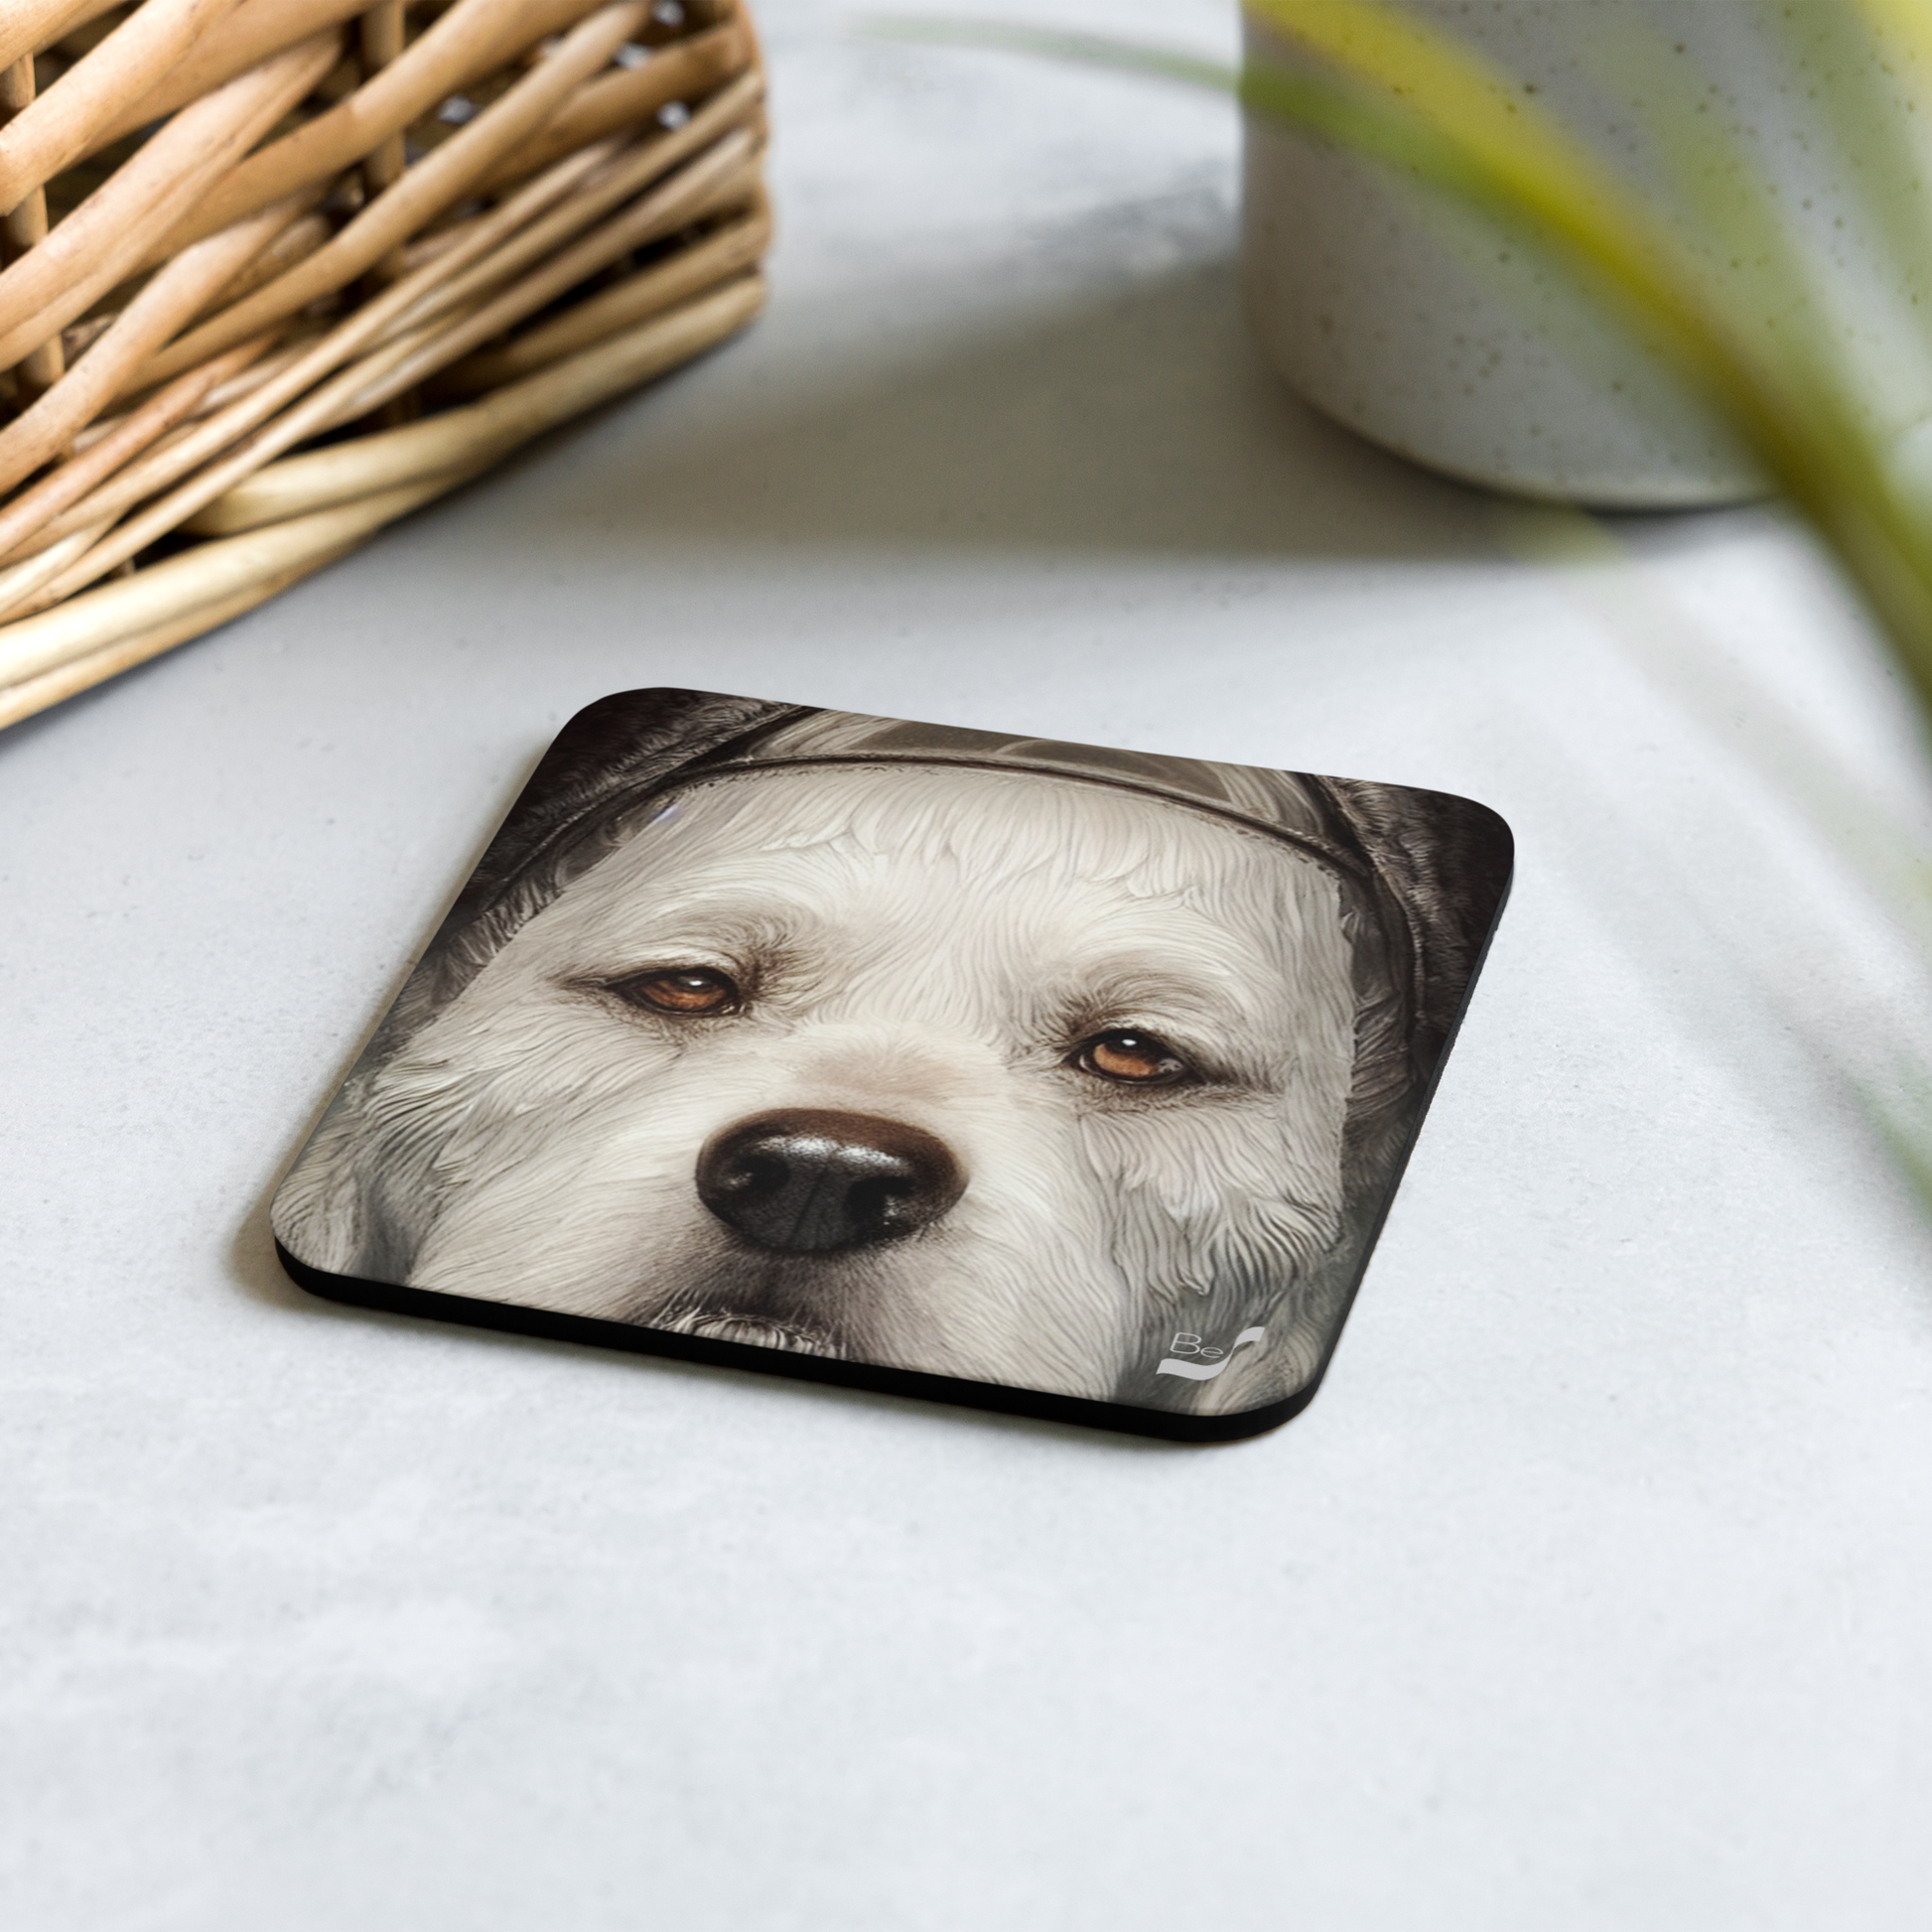 Are You Looking at Me BeSculpt Art Cork-back Coaster